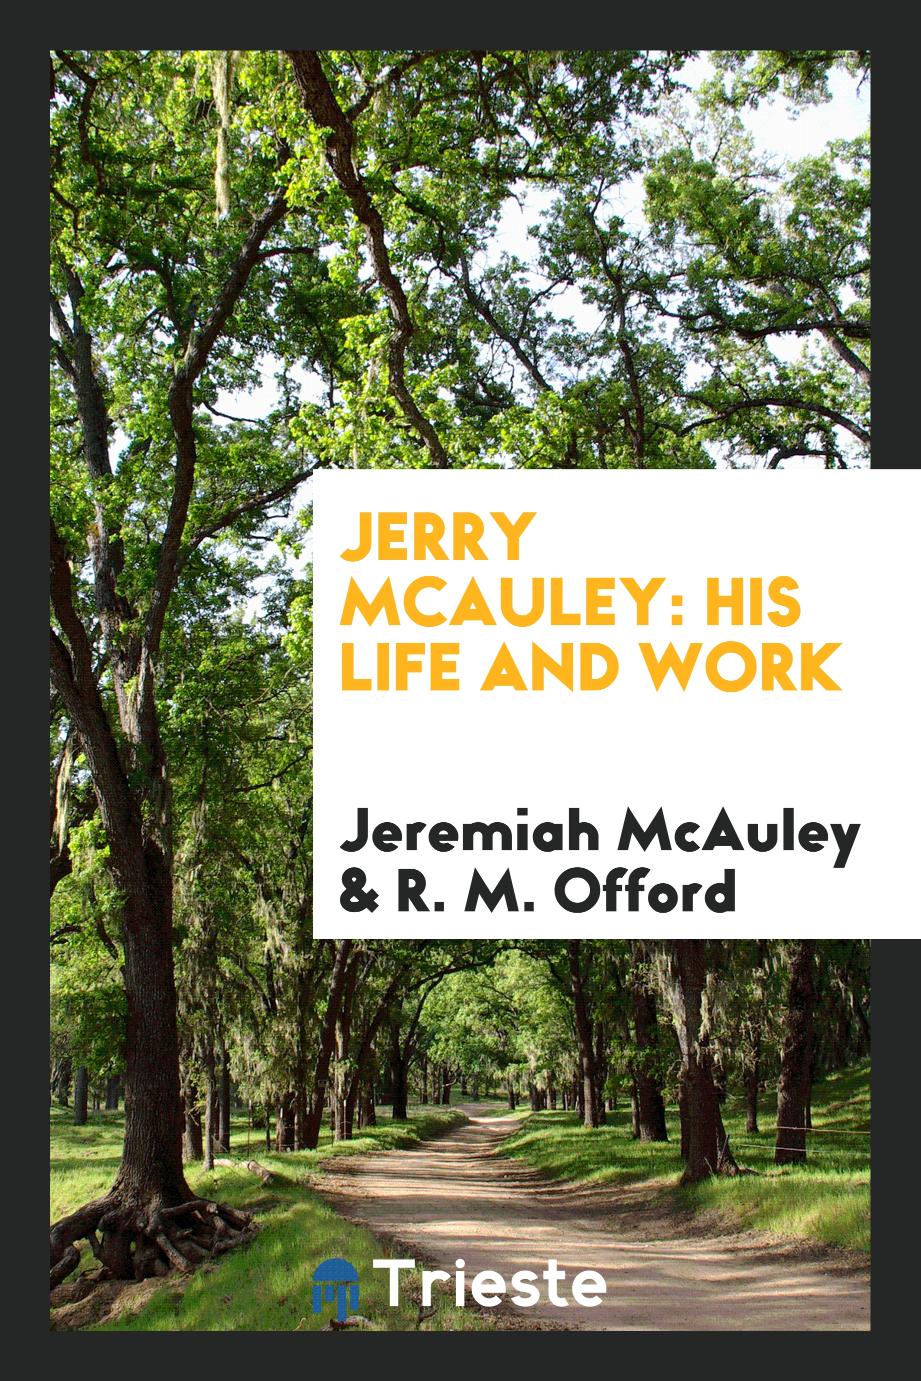 Jerry McAuley: his life and work